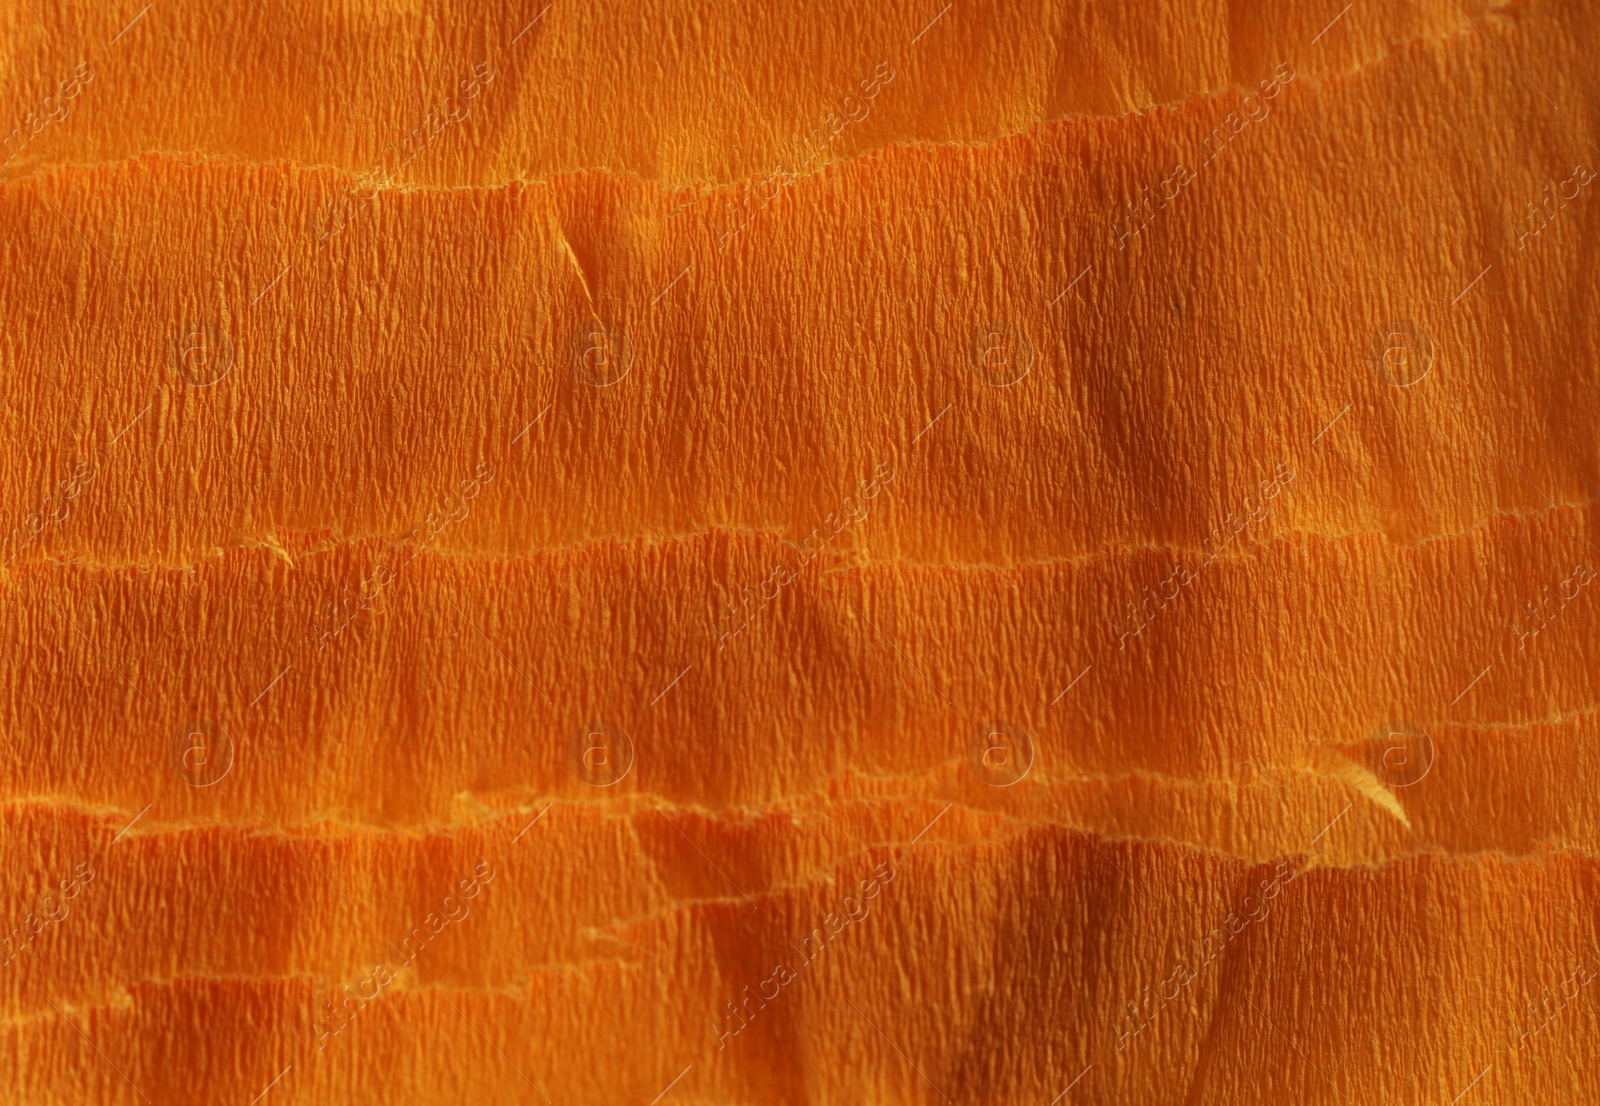 Photo of Orange textured material as background, closeup view